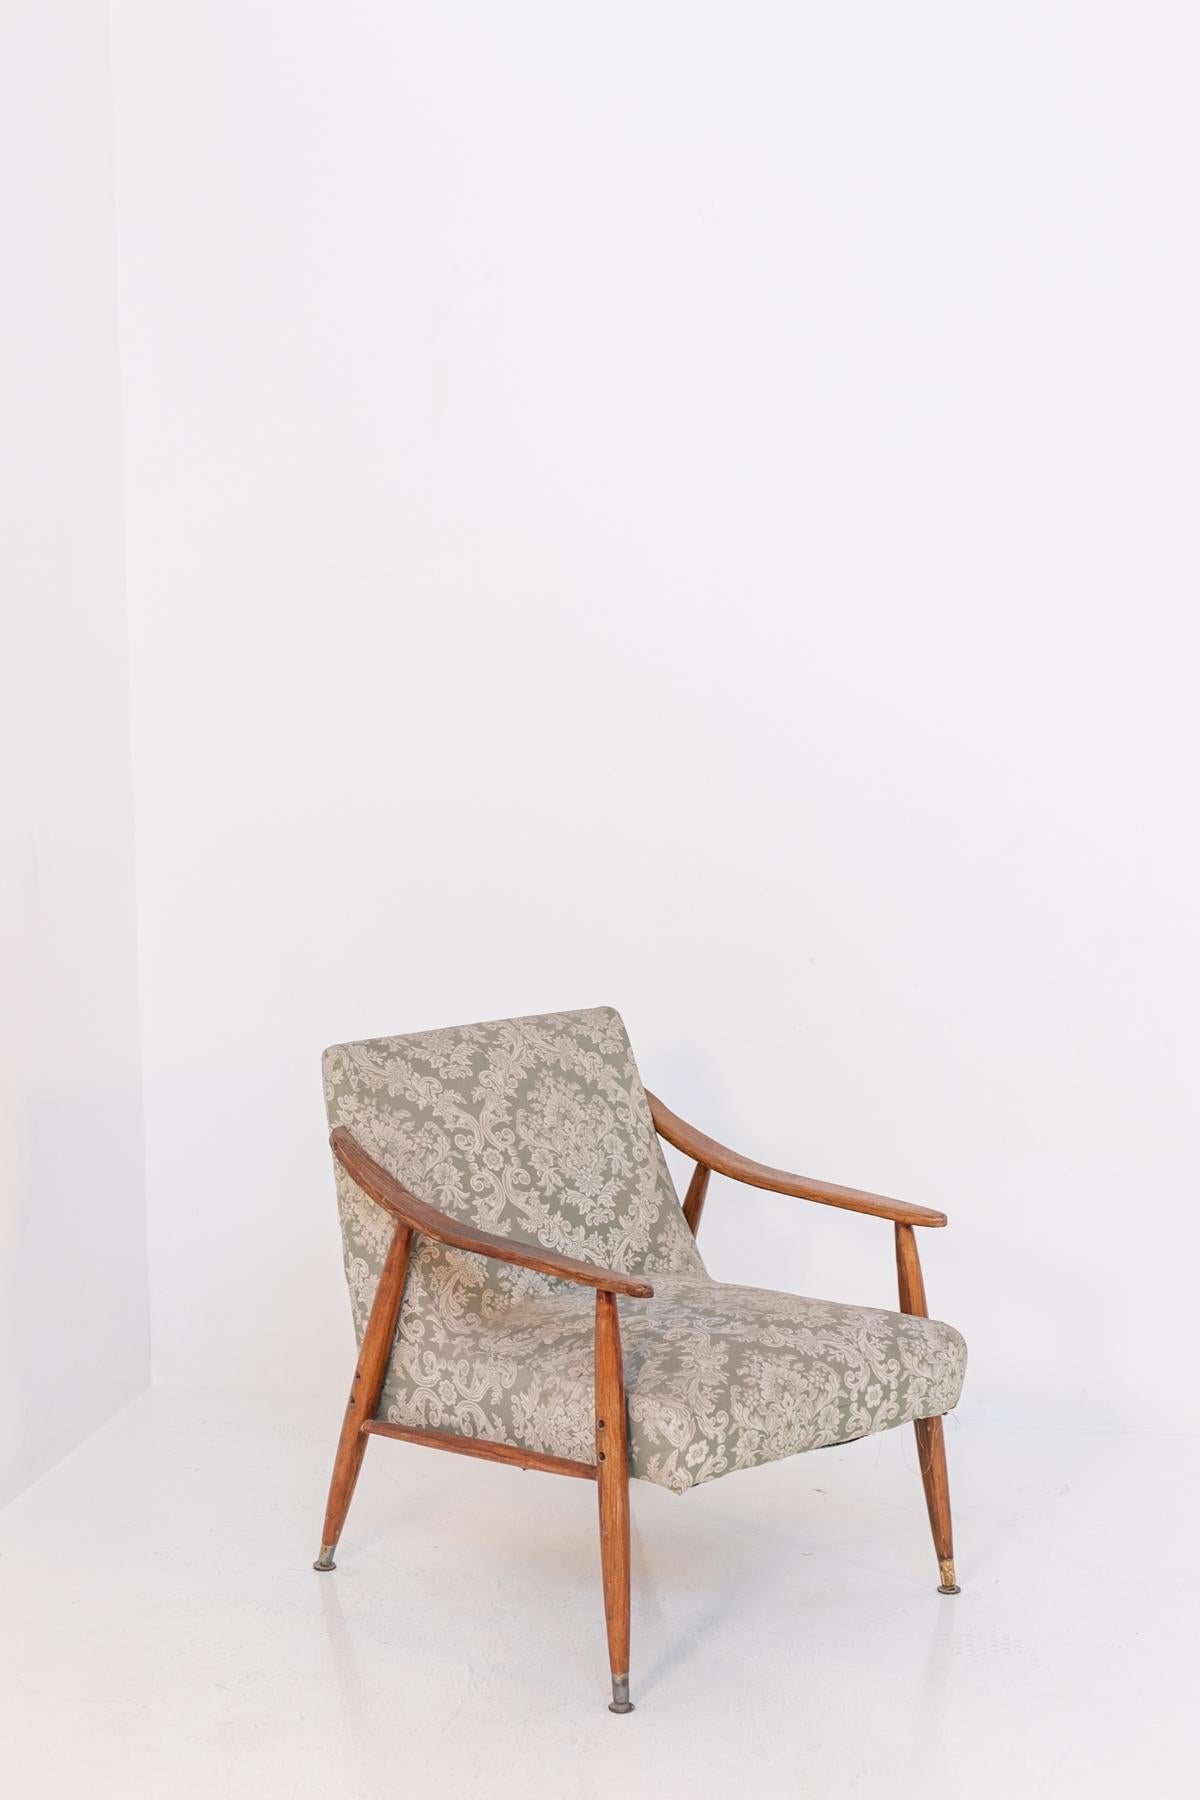 Nordic Armchair in Wood and Damask Fabric For Sale 2